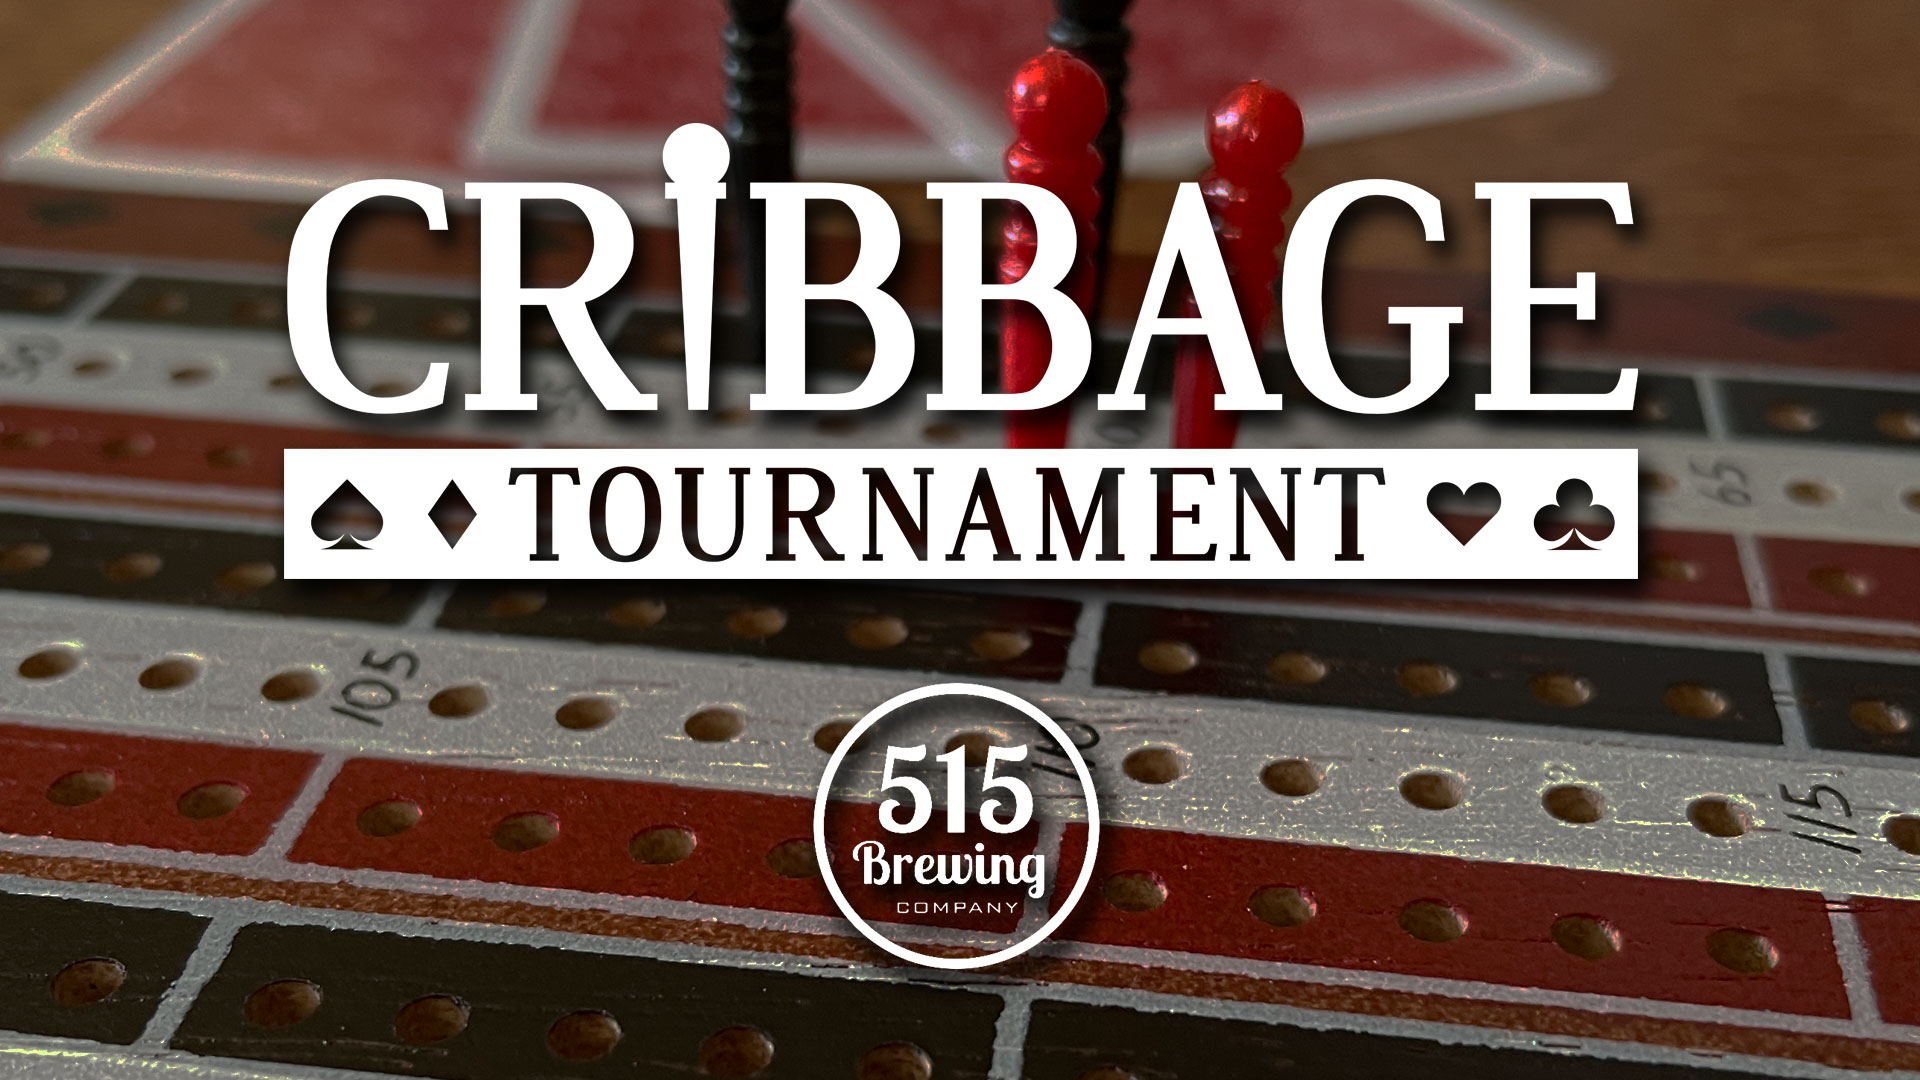 Cribbage Tournament at 515 Brewing Company Event Image